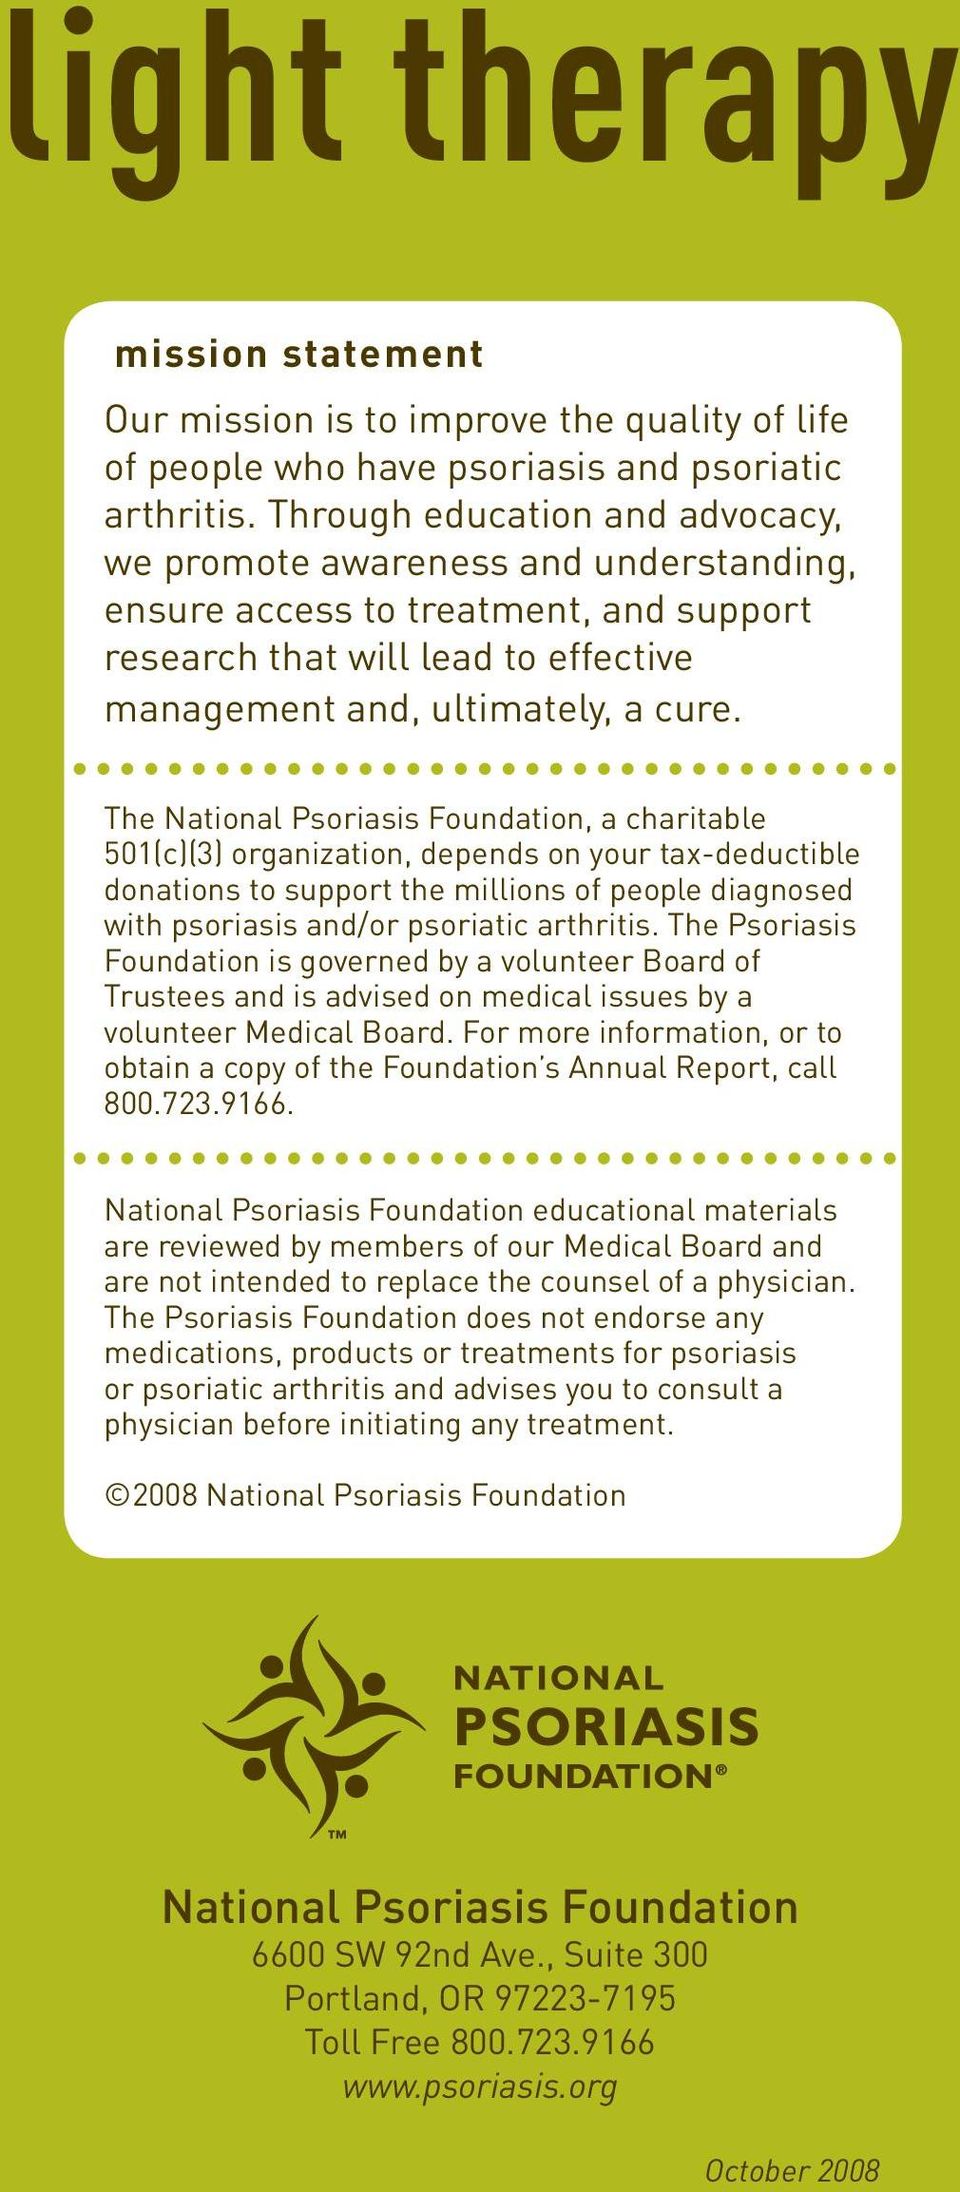 The National Psoriasis Foundation, a charitable 501(c)(3) organization, depends on your tax-deductible donations to support the millions of people diagnosed with psoriasis and/or psoriatic arthritis.